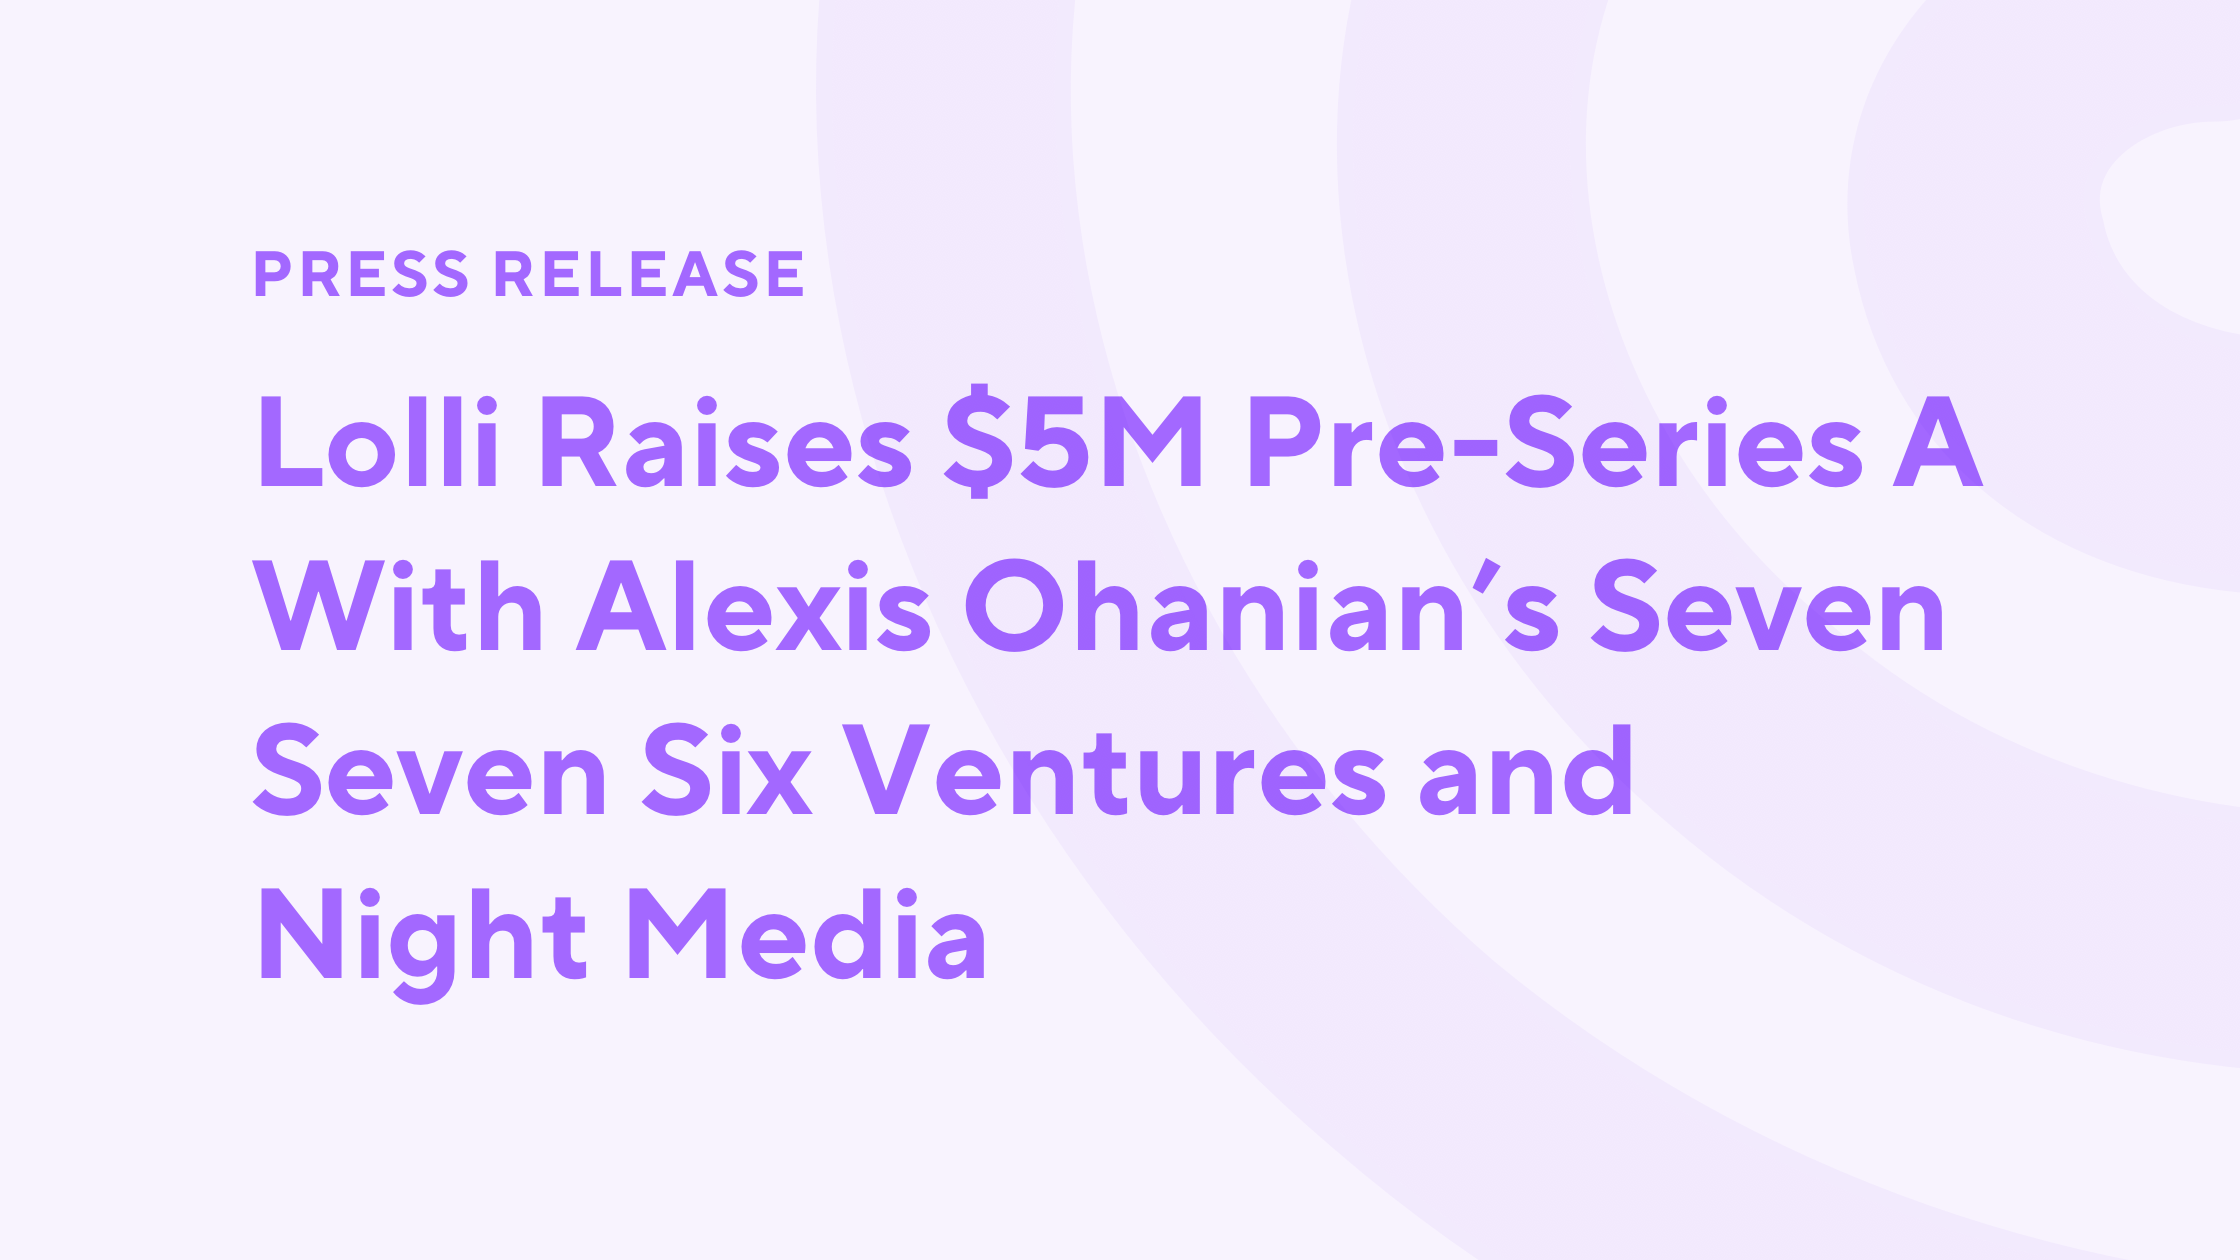 Lolli Raises $5M Pre-Series A With Alexis Ohanian’s Seven Seven Six Ventures and Night Media